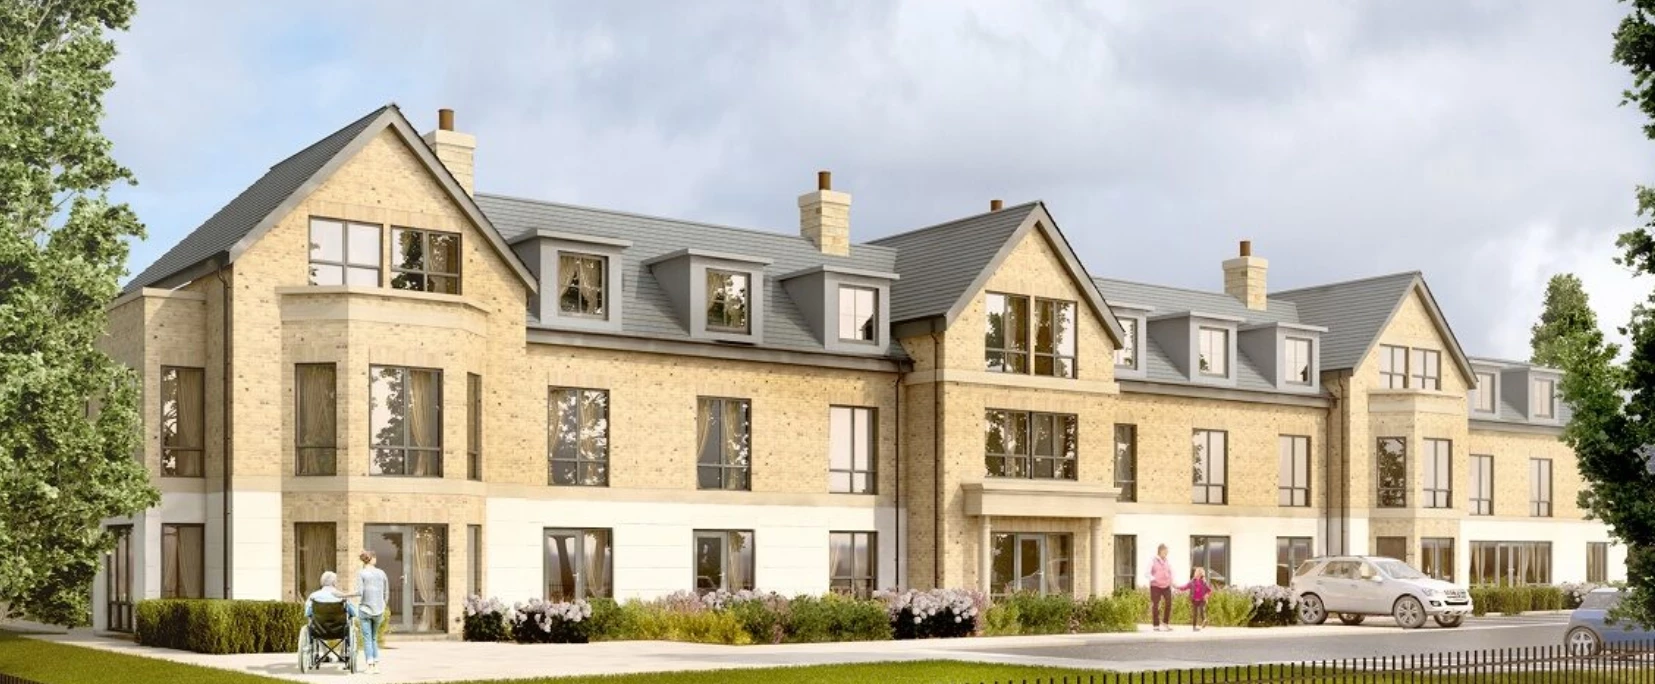 The new 67-bedroom care home on London Road, Sleaford, Lincolnshire being built by Hobson & Porter.